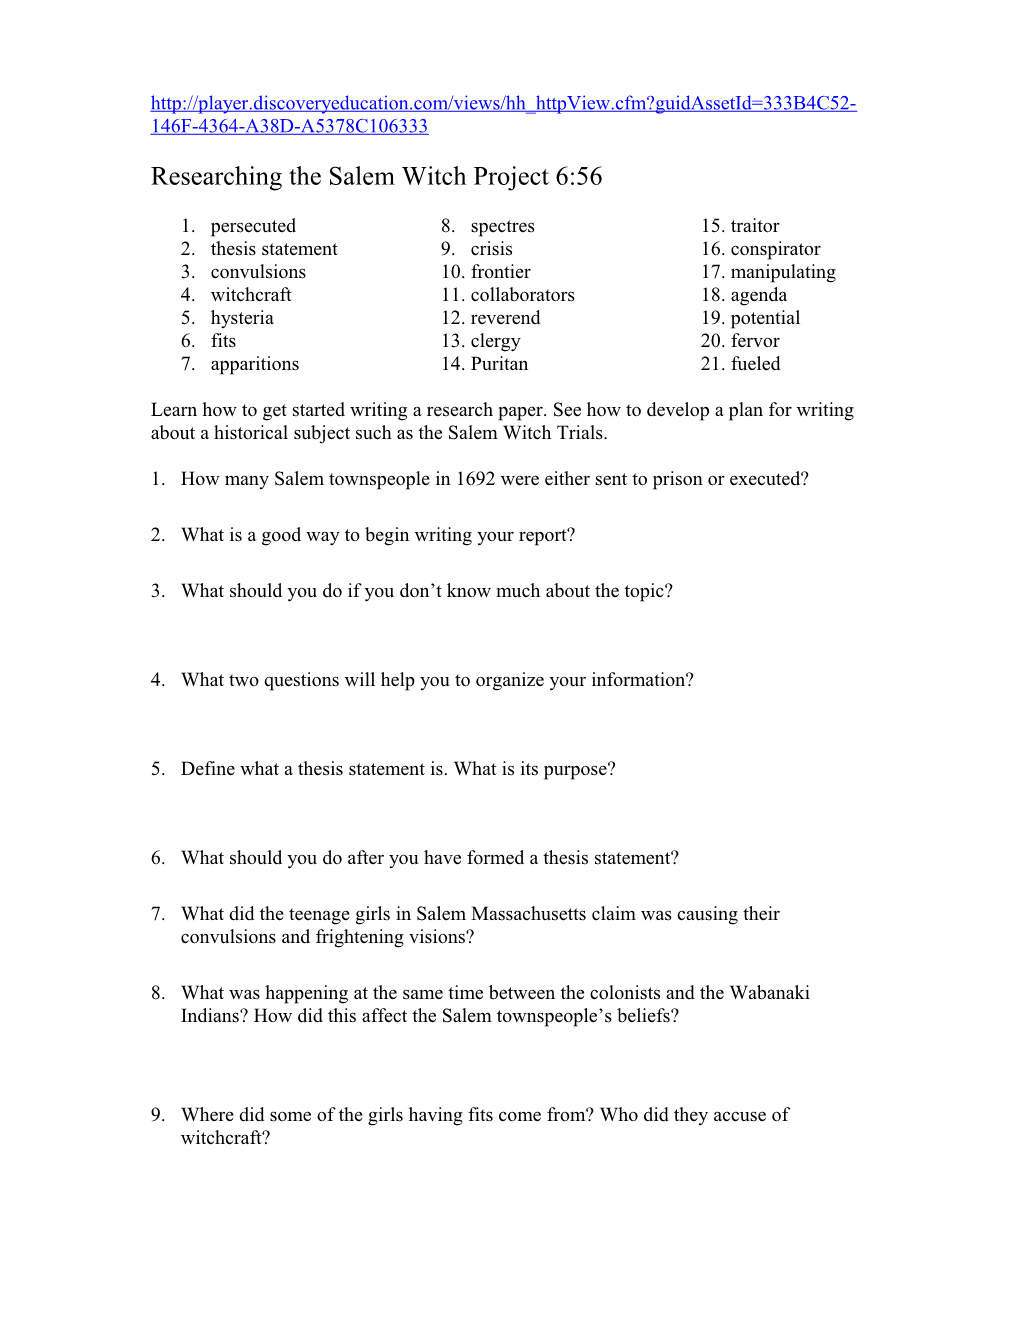 Researching the Salem Witch Project 6:56